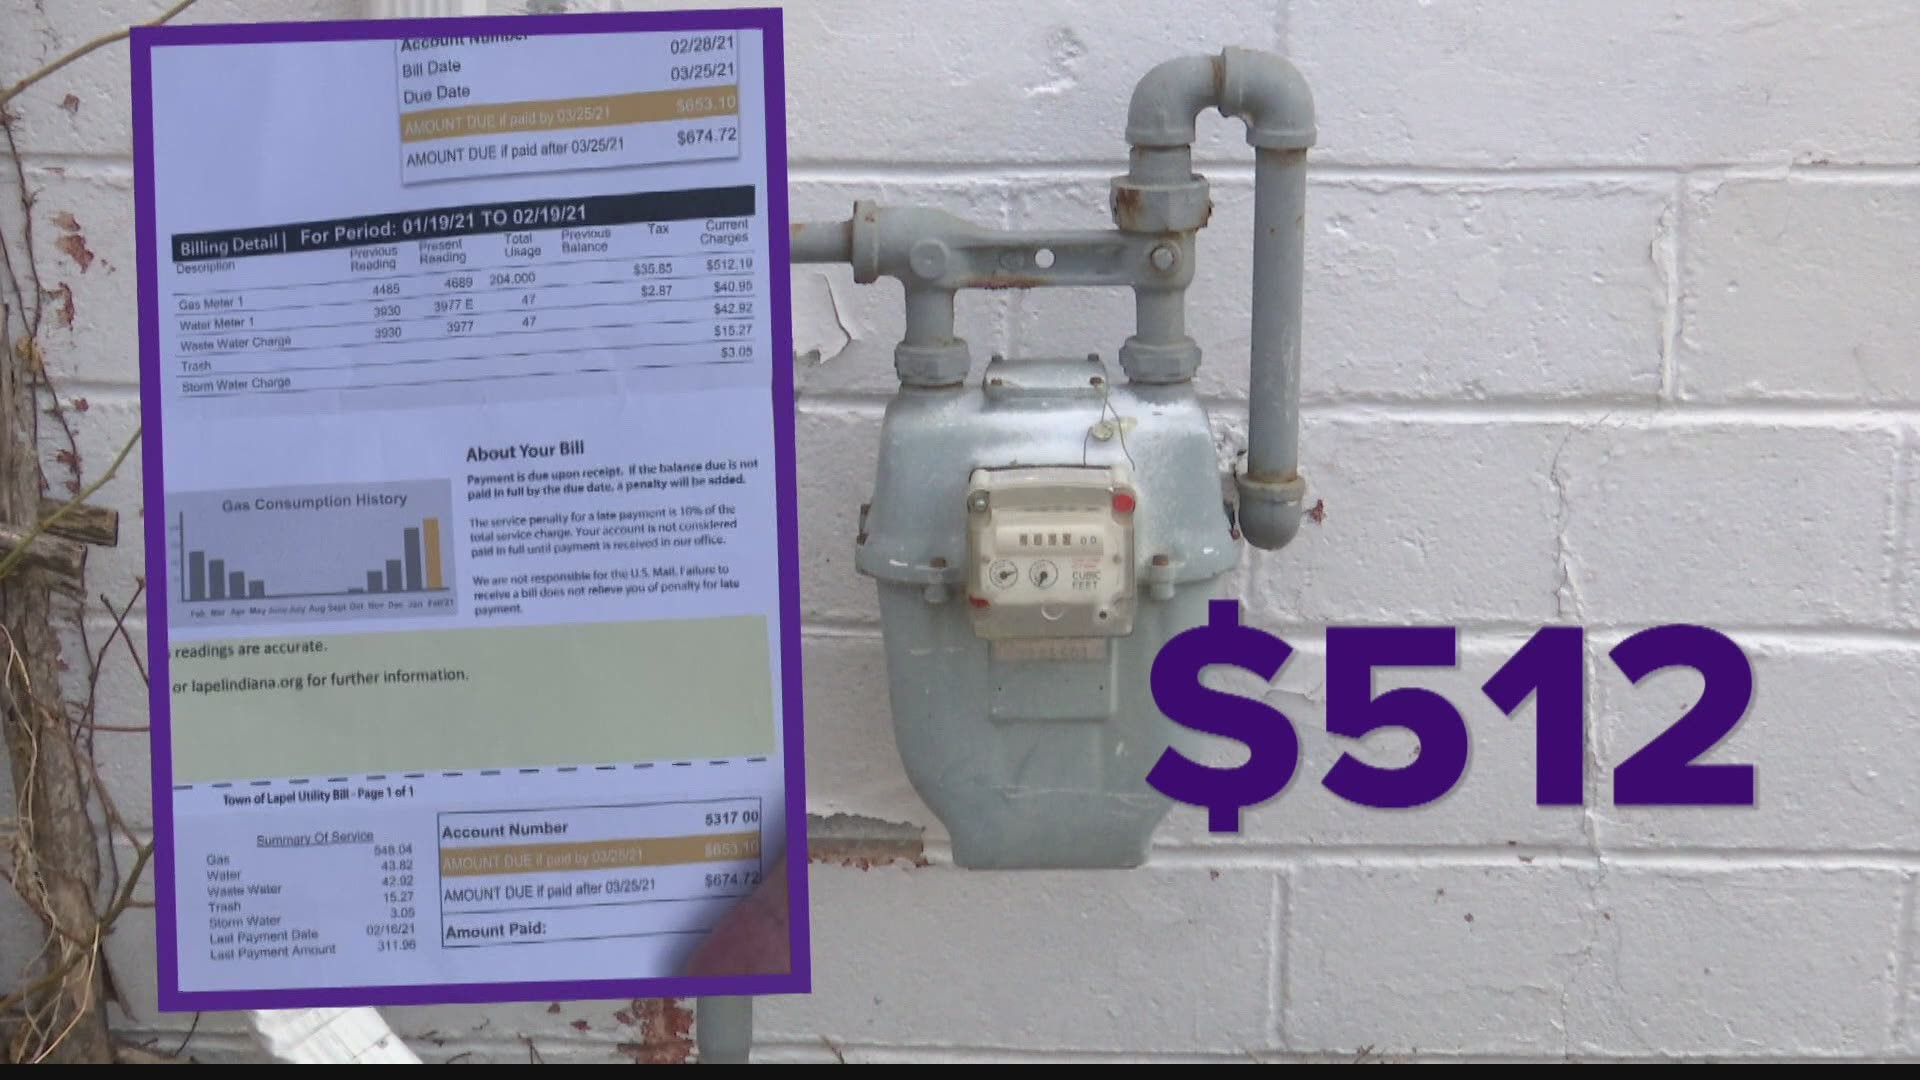 In Lapel, some residents say their gas bill more than tripled. Our Rich Nye tells looks into the price spike and who's paying for it.